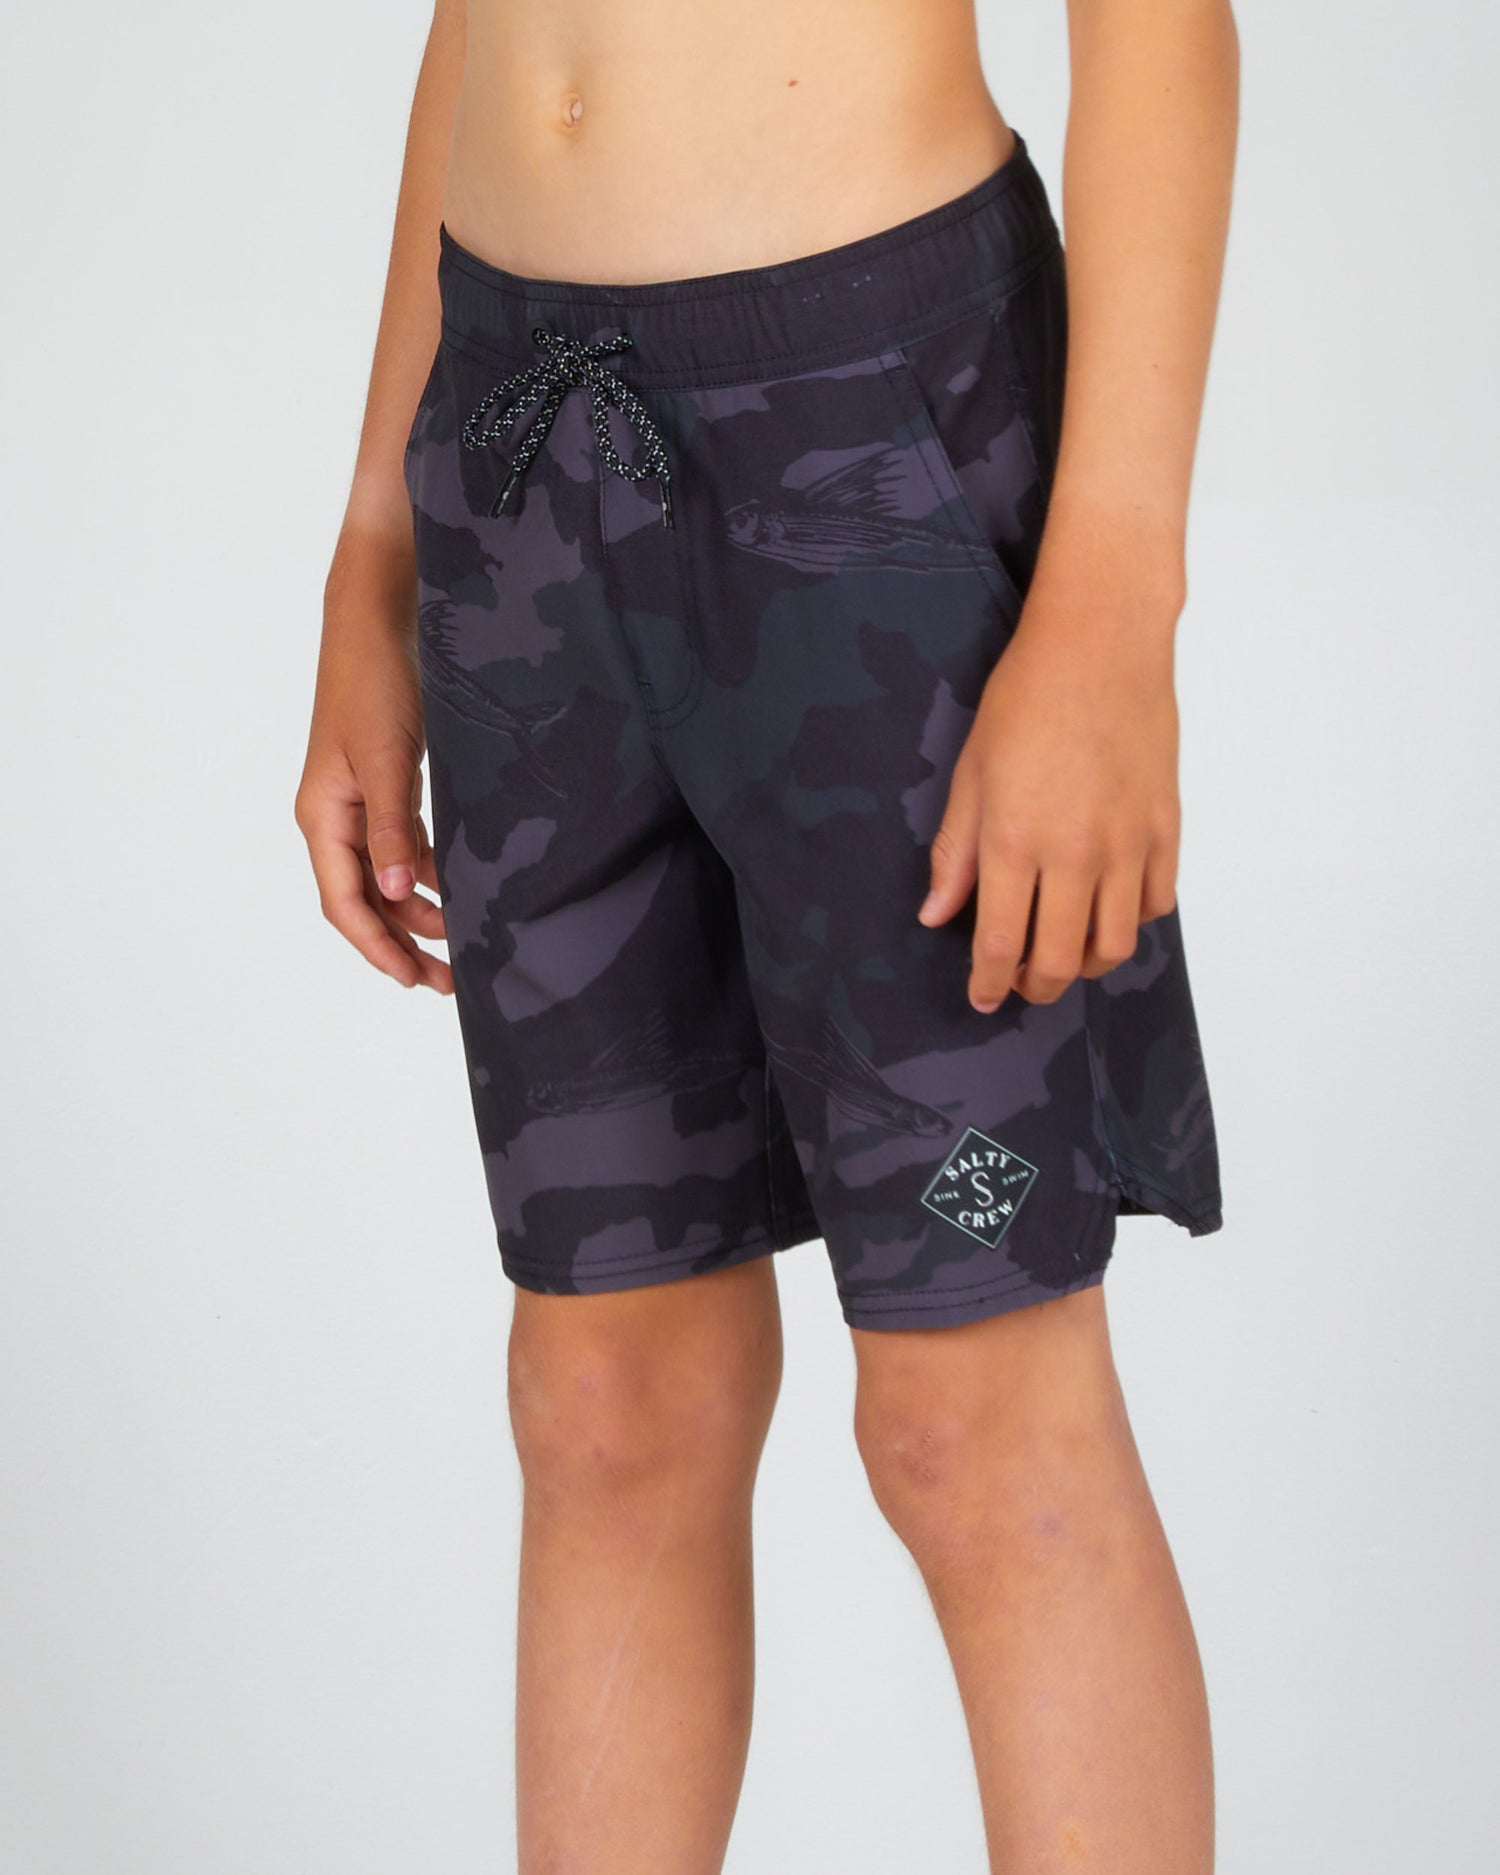 On body front angled view of the Lowtide Boys Black Camo Elastic Boardshort